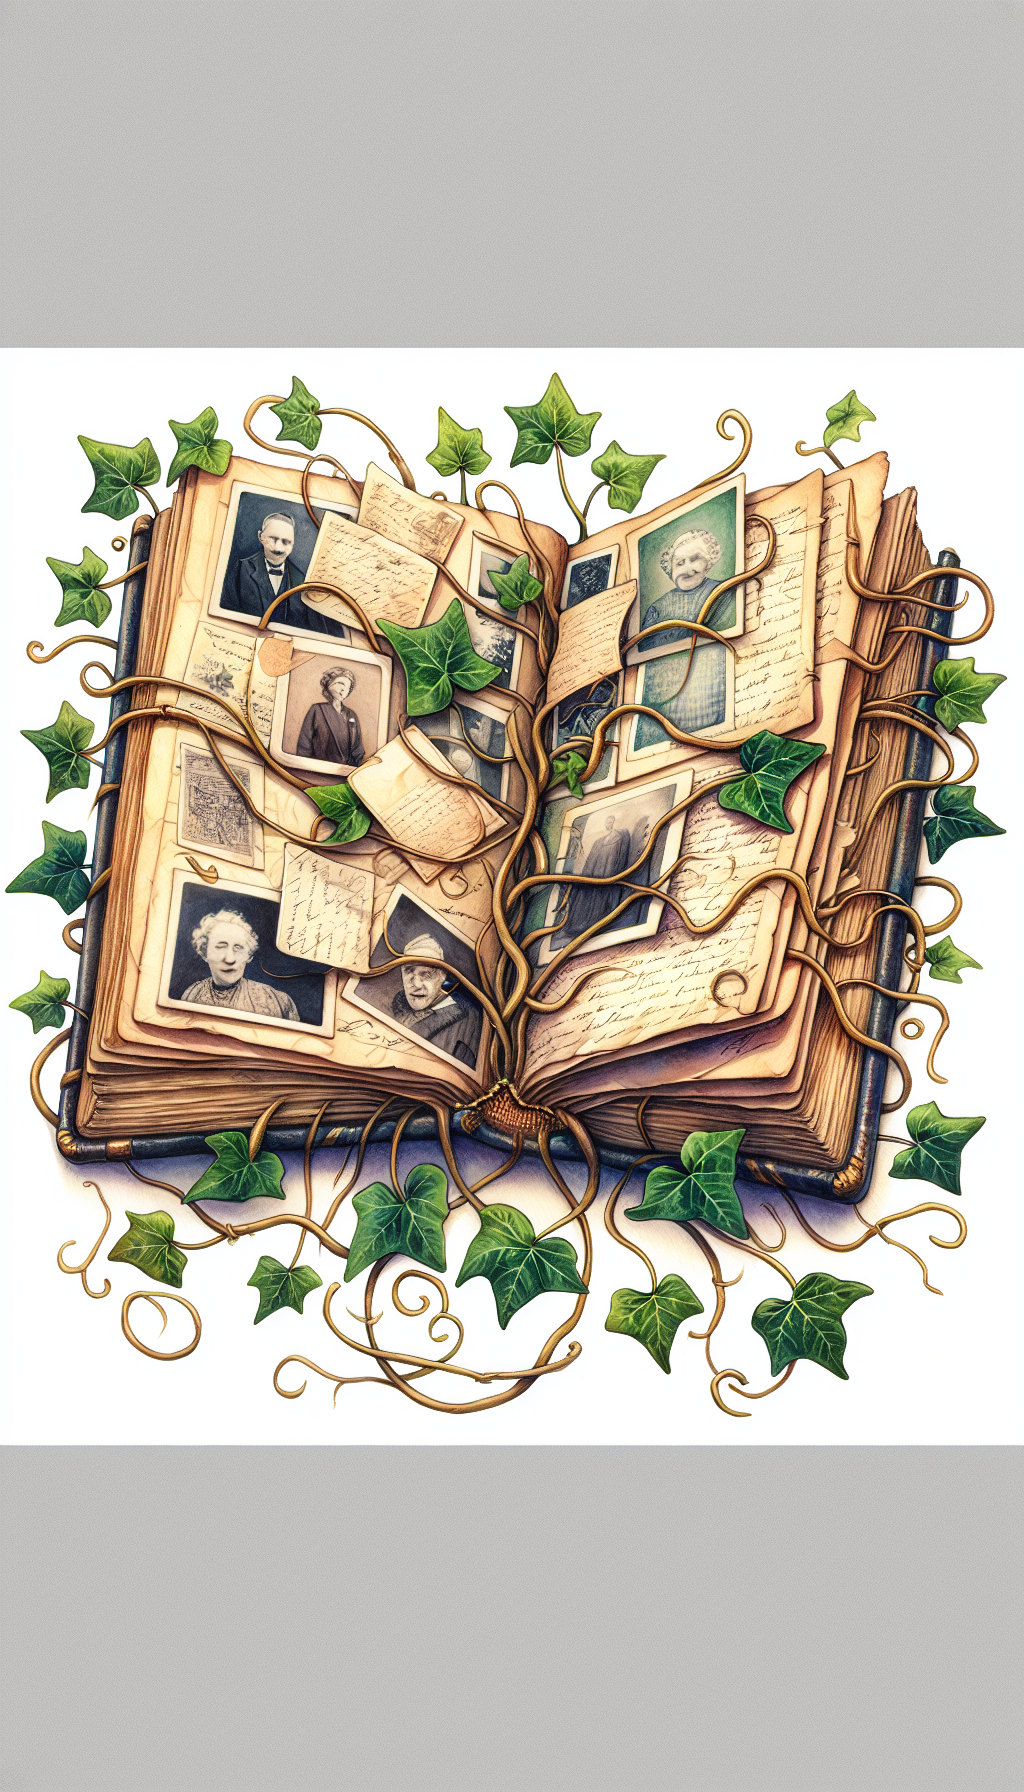 A whimsical watercolor vignette portrays an elderly book cradling a collection of faded photographs and letters within its open pages, each bearing tender scribbles and gentle creases. Entwining ivy leaves of gold foil suggest the timeless fusion of nature and narrative, symbolizing the cherished emotional values ensconced in the fibers of old tomes.